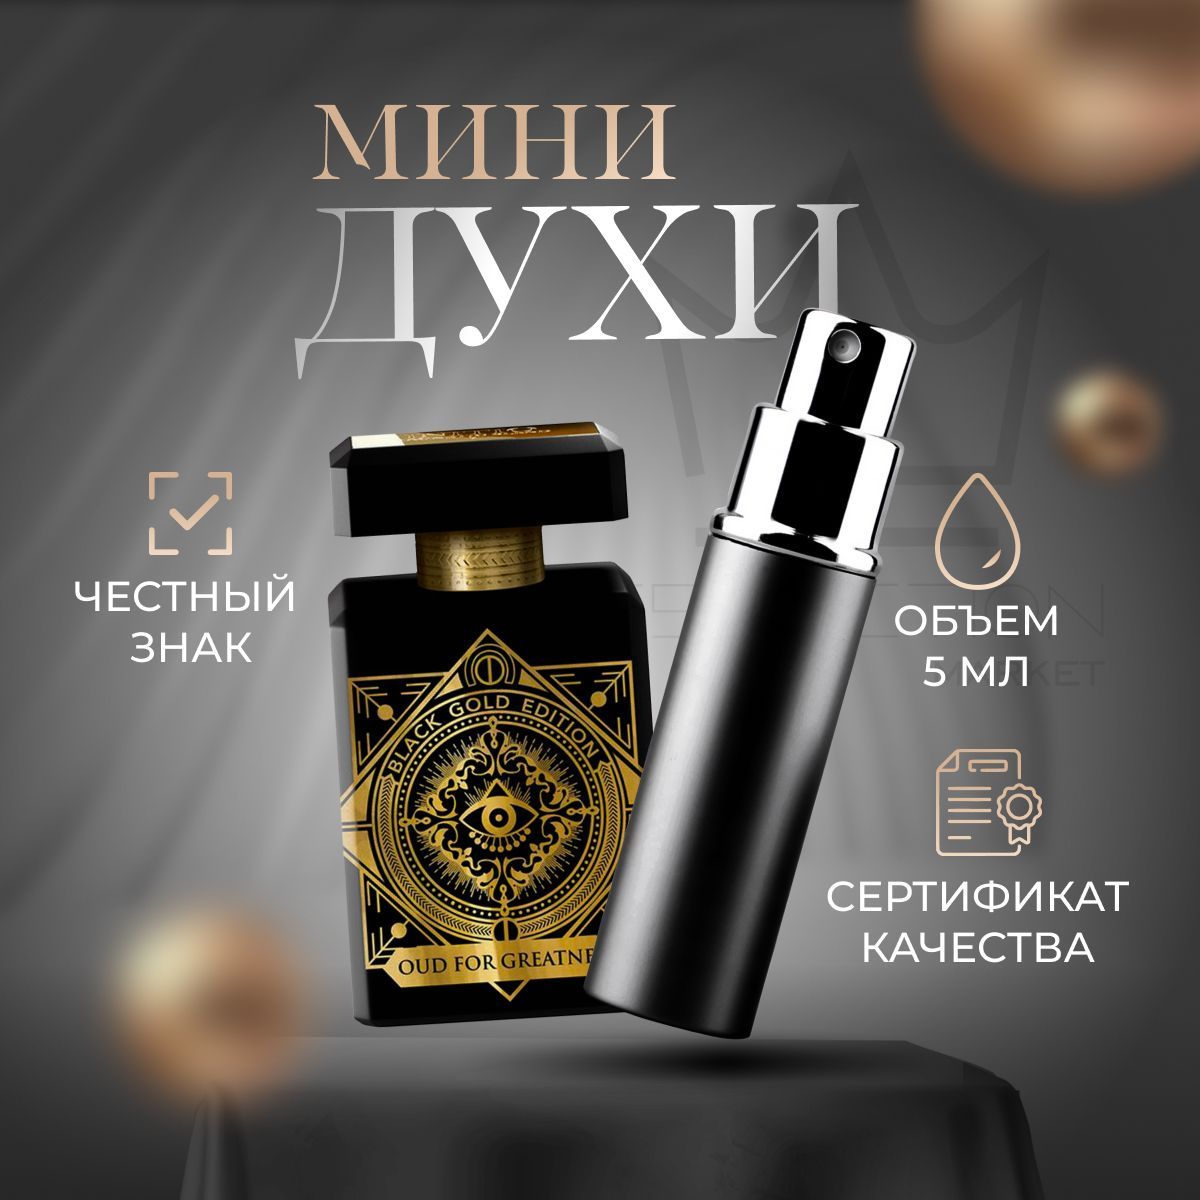 Initio Parfums prives oud for Greatness. Initio oud for Greatness. Тестер Initio oud for Greatness 65мл. Инитио парфюм отзывы